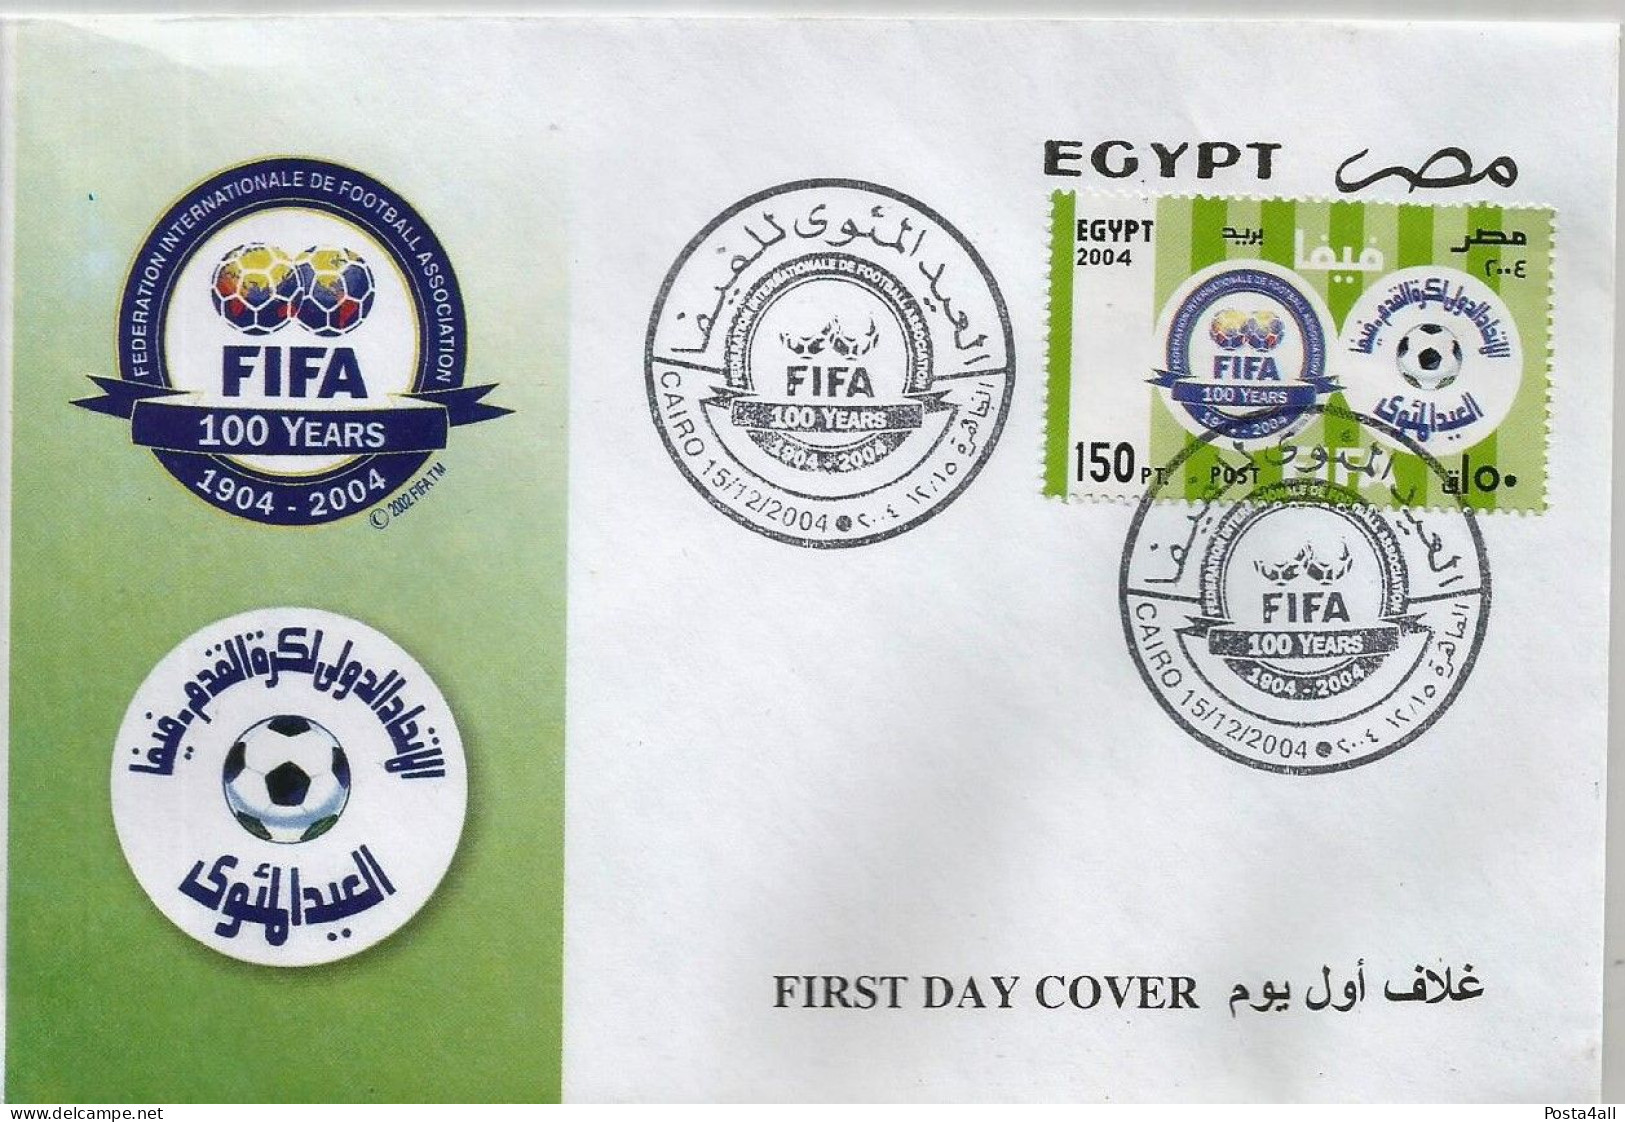 Egypt  - 2004 The 100th Anniversary Of FIFA (Federation Internationale De Football Association)  - Complete Issue - FDC - Lettres & Documents